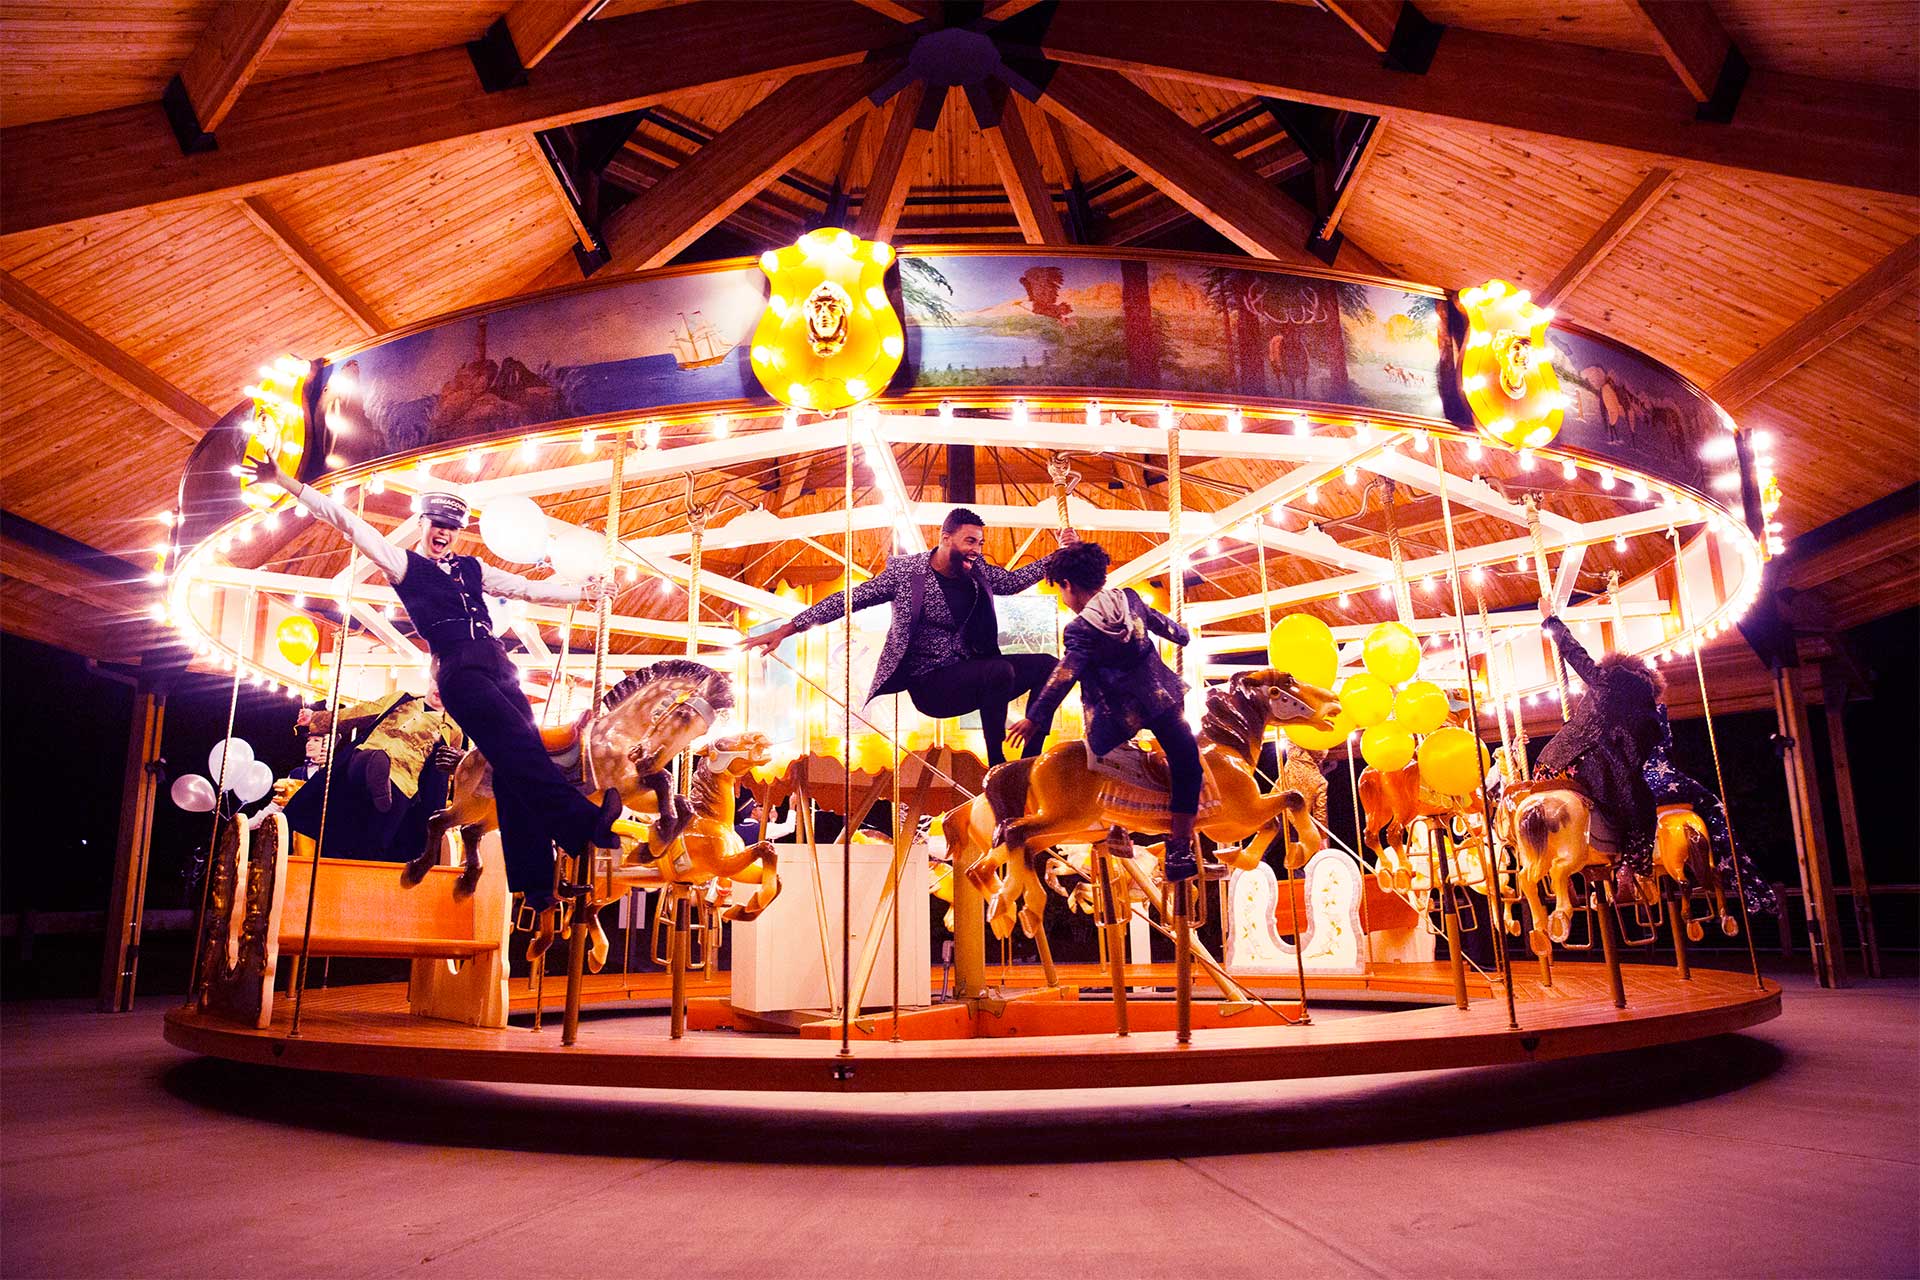 People standing on a carousel